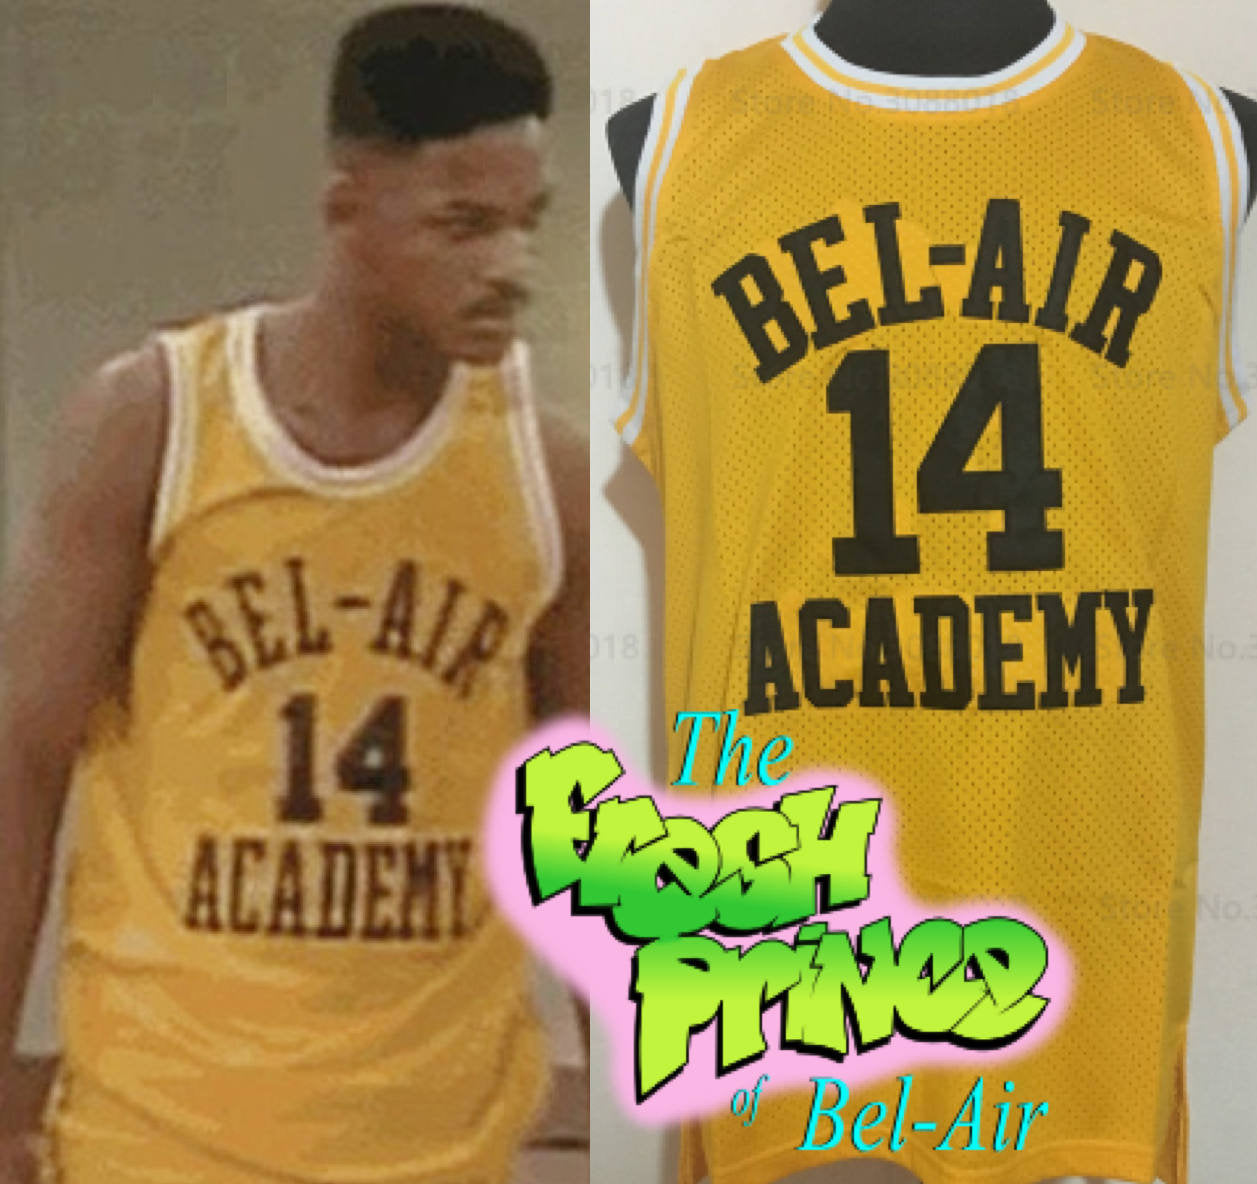 Bel-Air Academy Smith Jersey